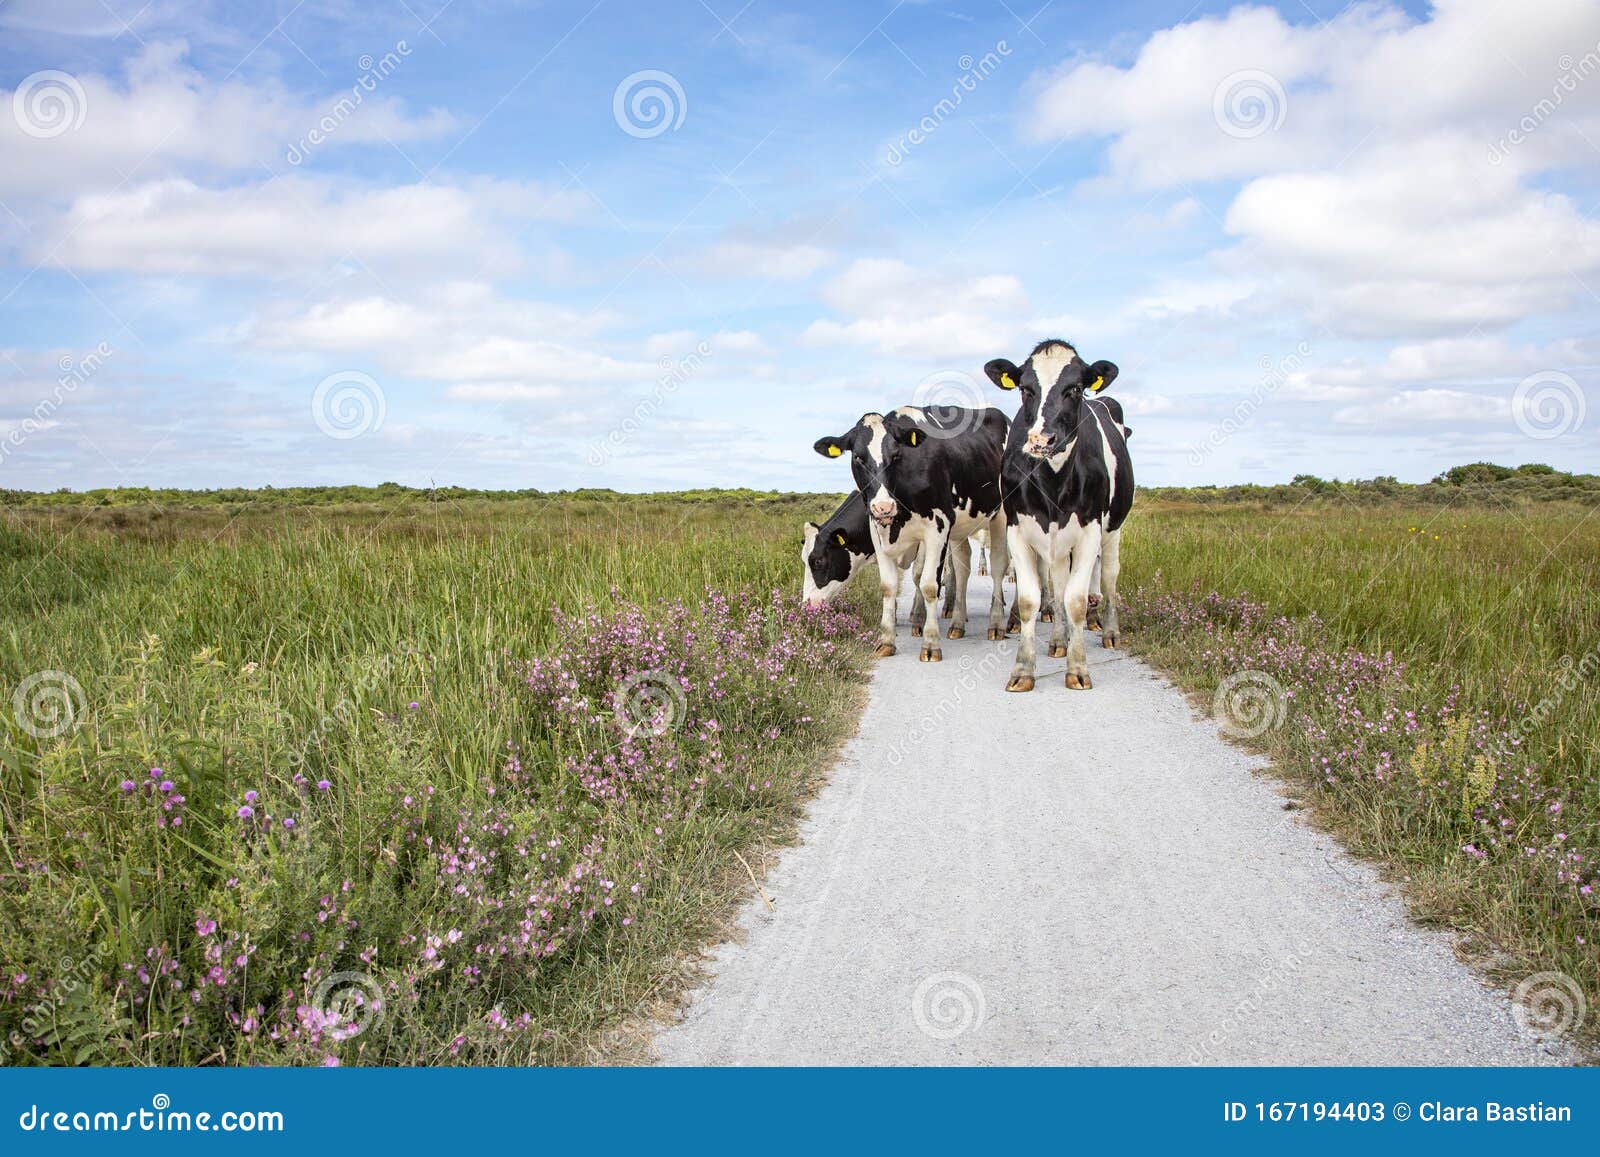 four cows stroll along a path with purple flowers on either side on a summer day on the island of schiermonnikoog